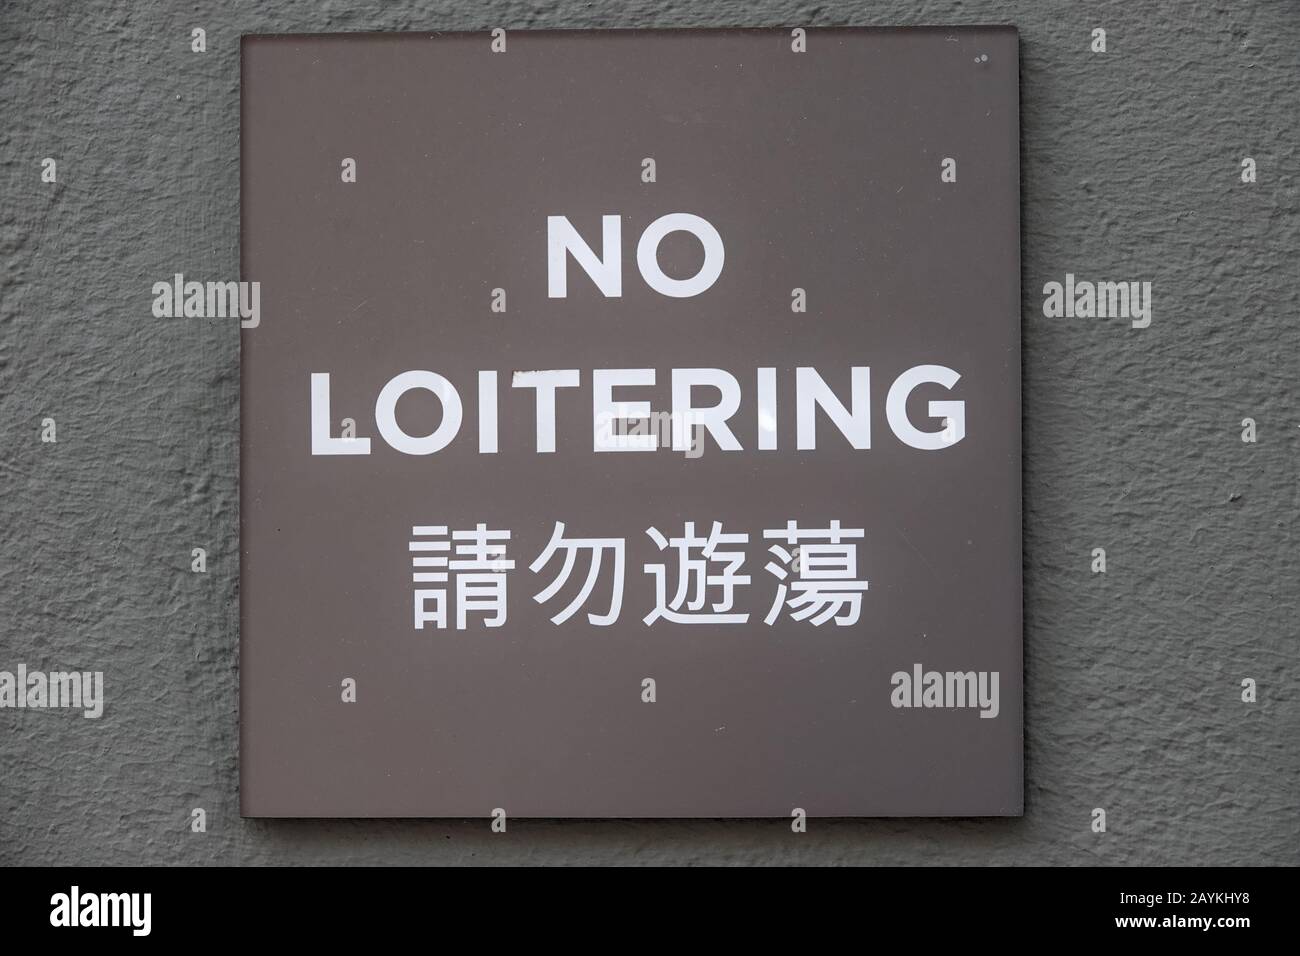 "No loitering" sign in English and Chinese, San Francisco Chinatown Stock Photo